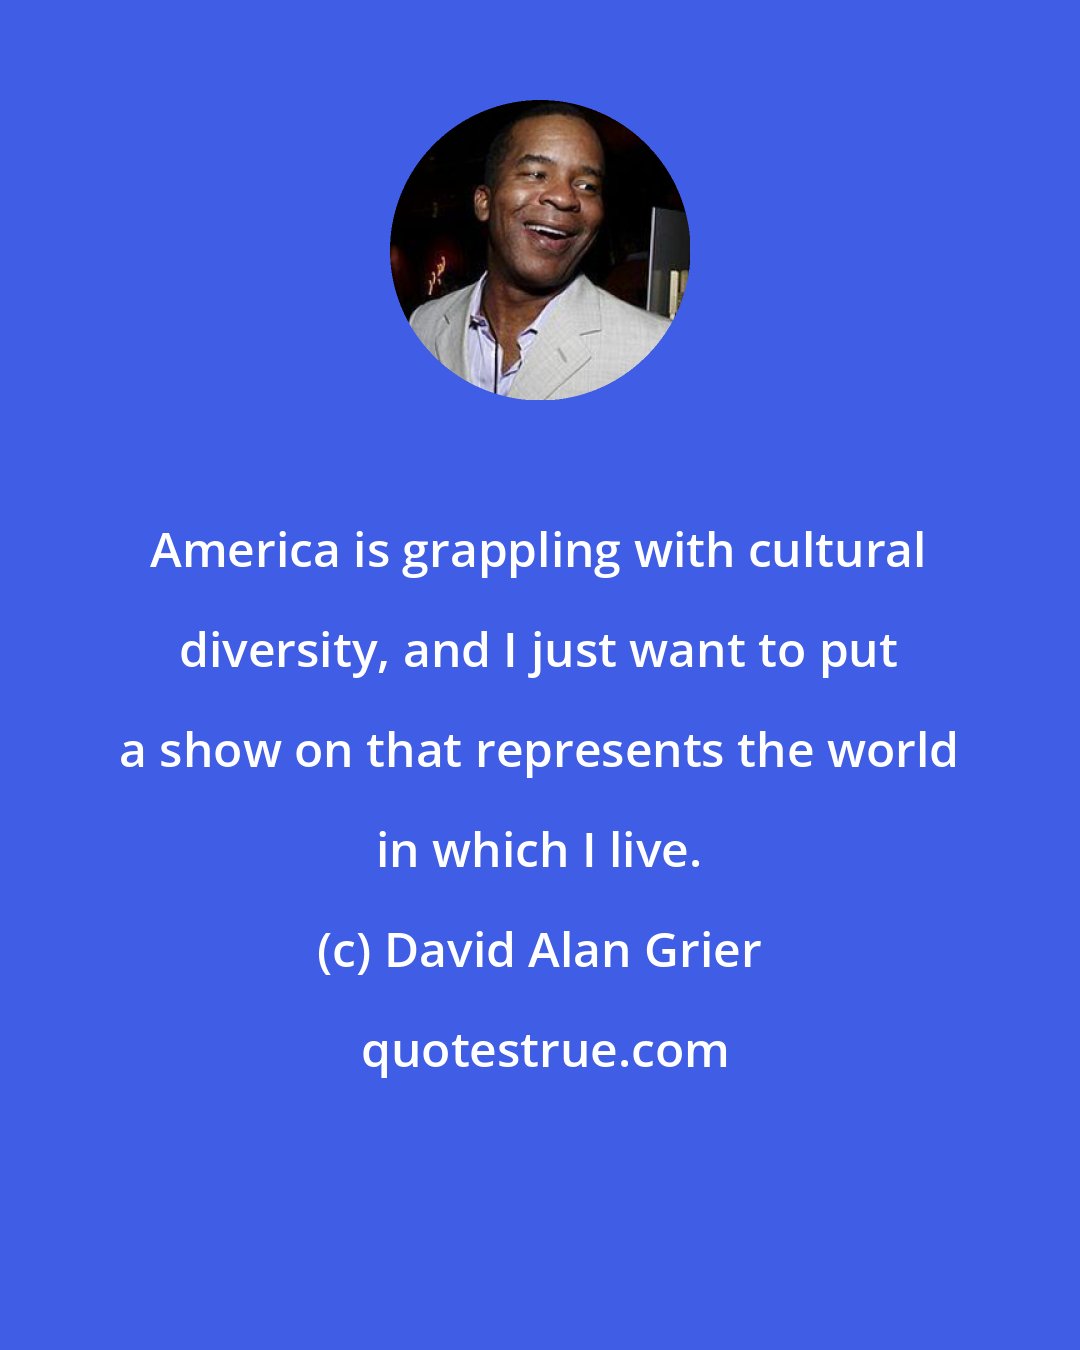 David Alan Grier: America is grappling with cultural diversity, and I just want to put a show on that represents the world in which I live.